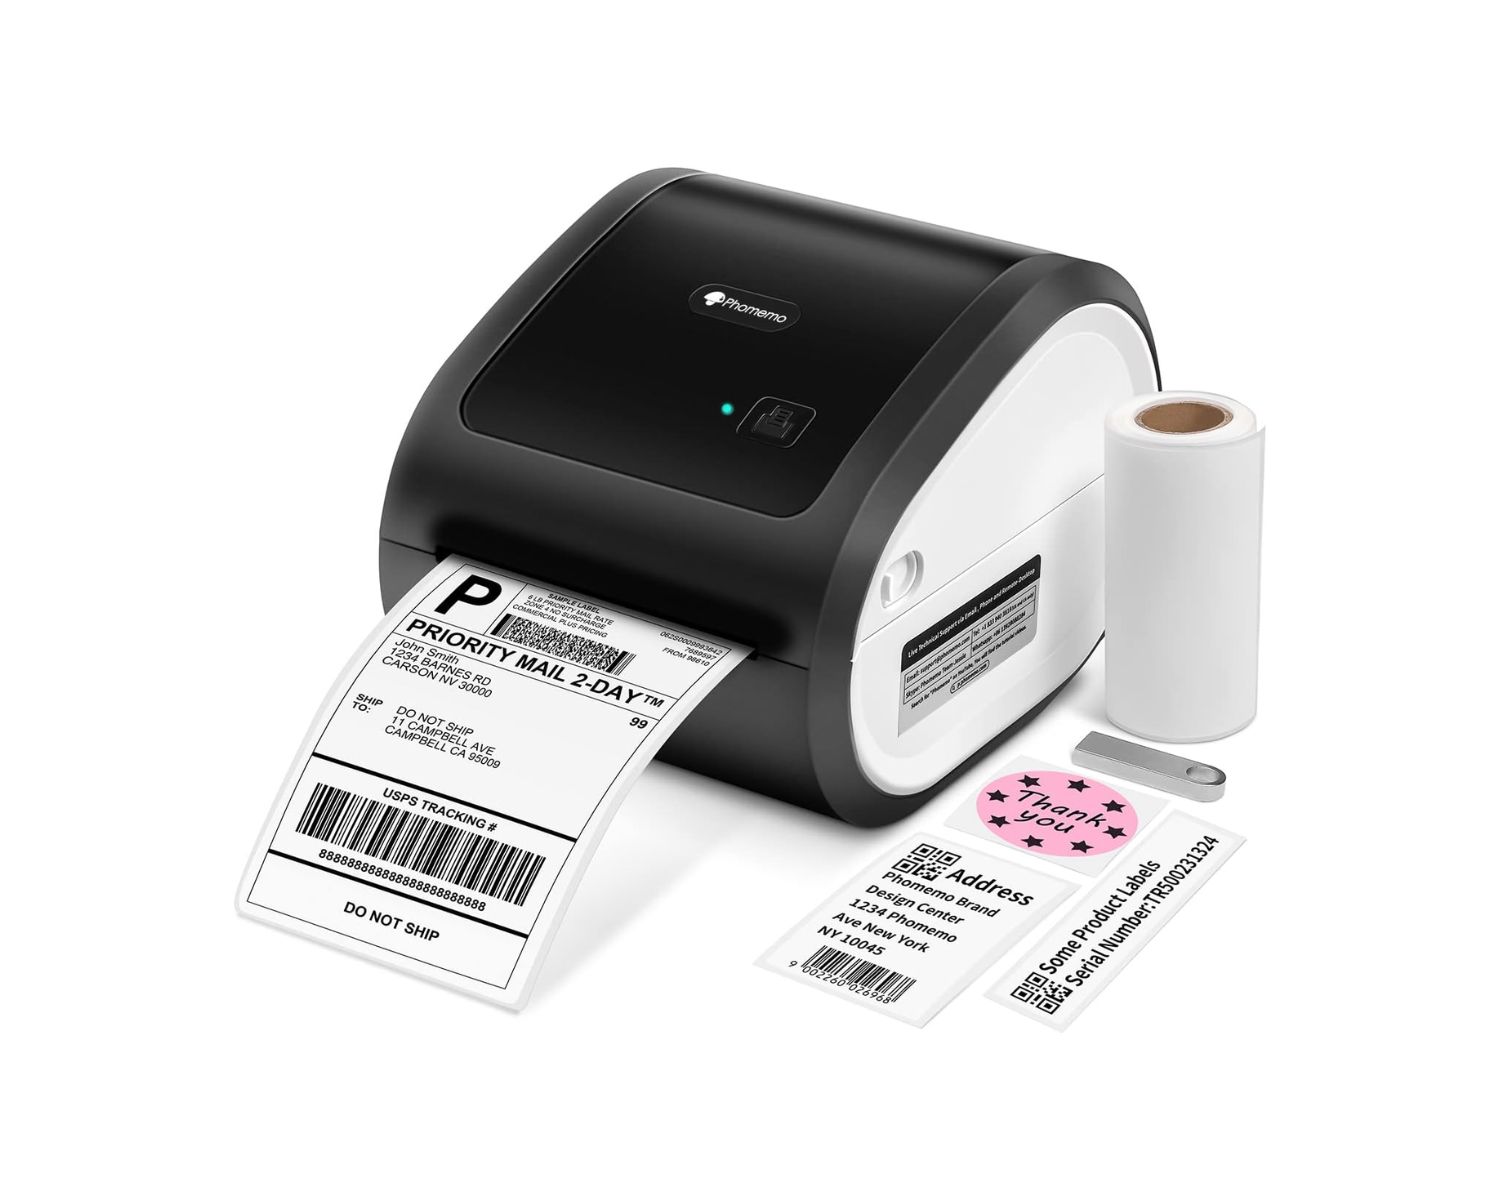 How To Print Ebay Labels On Thermal Printer